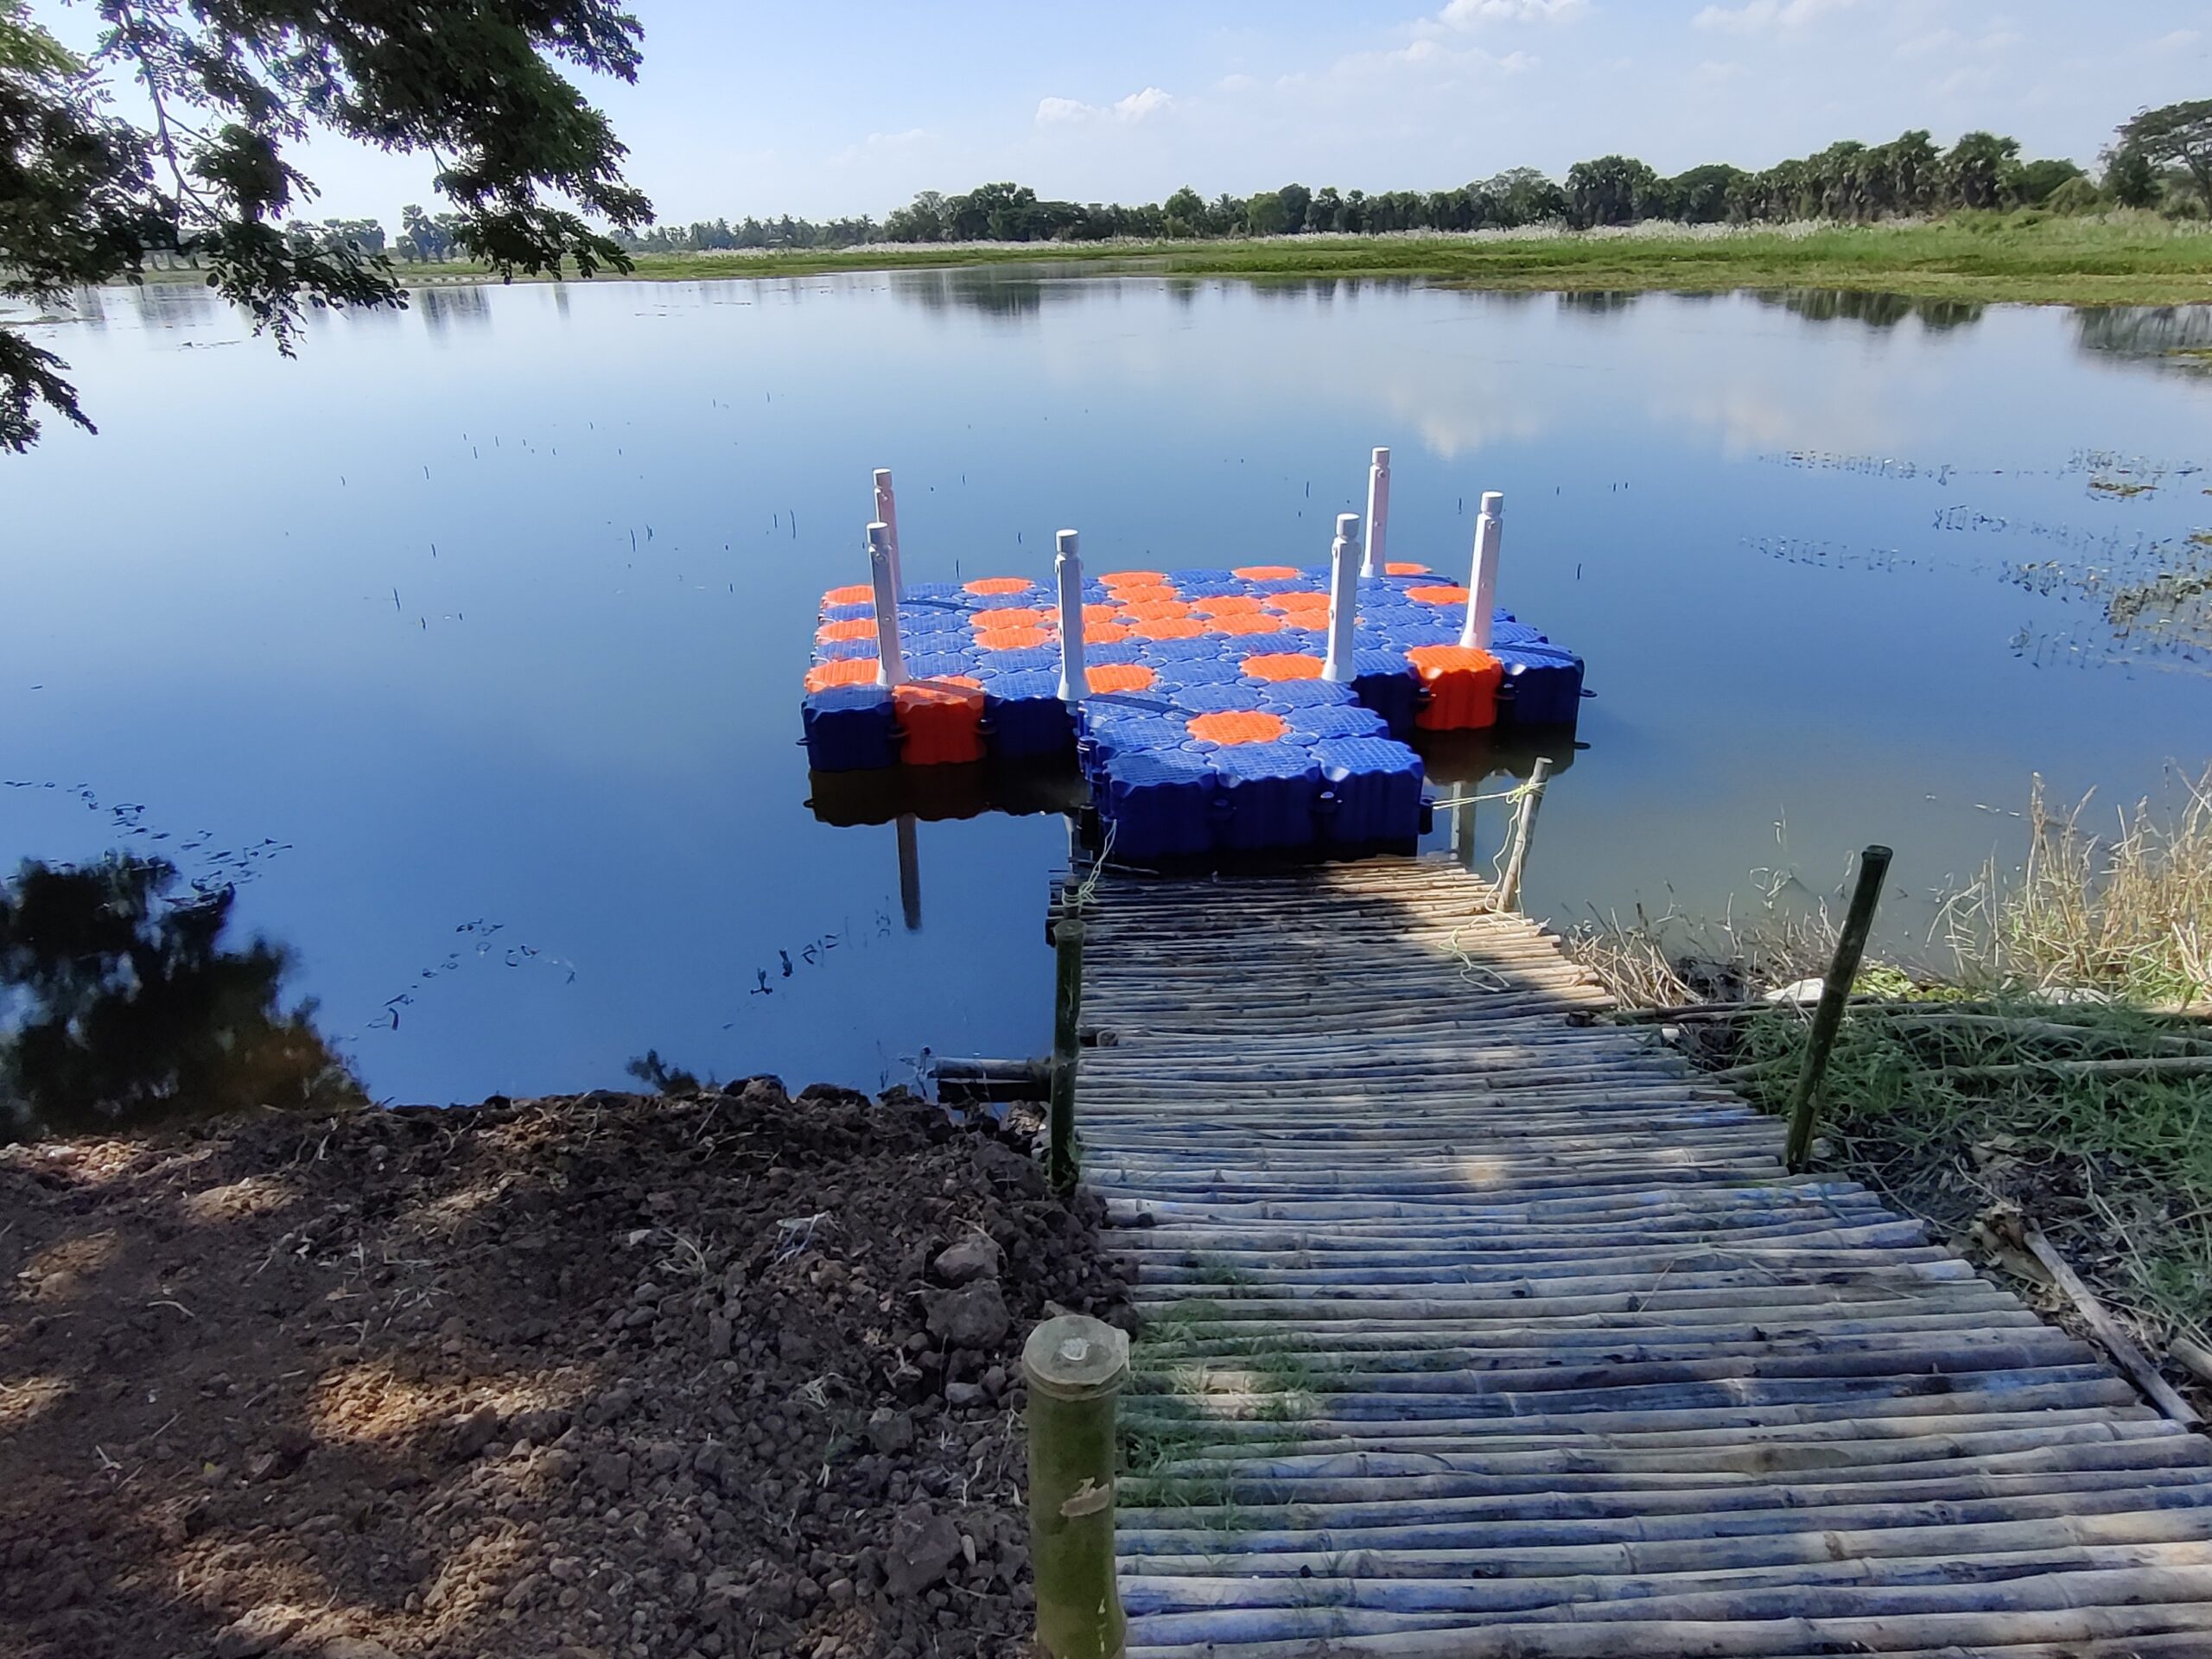 Water sports just across the road with our own private dock